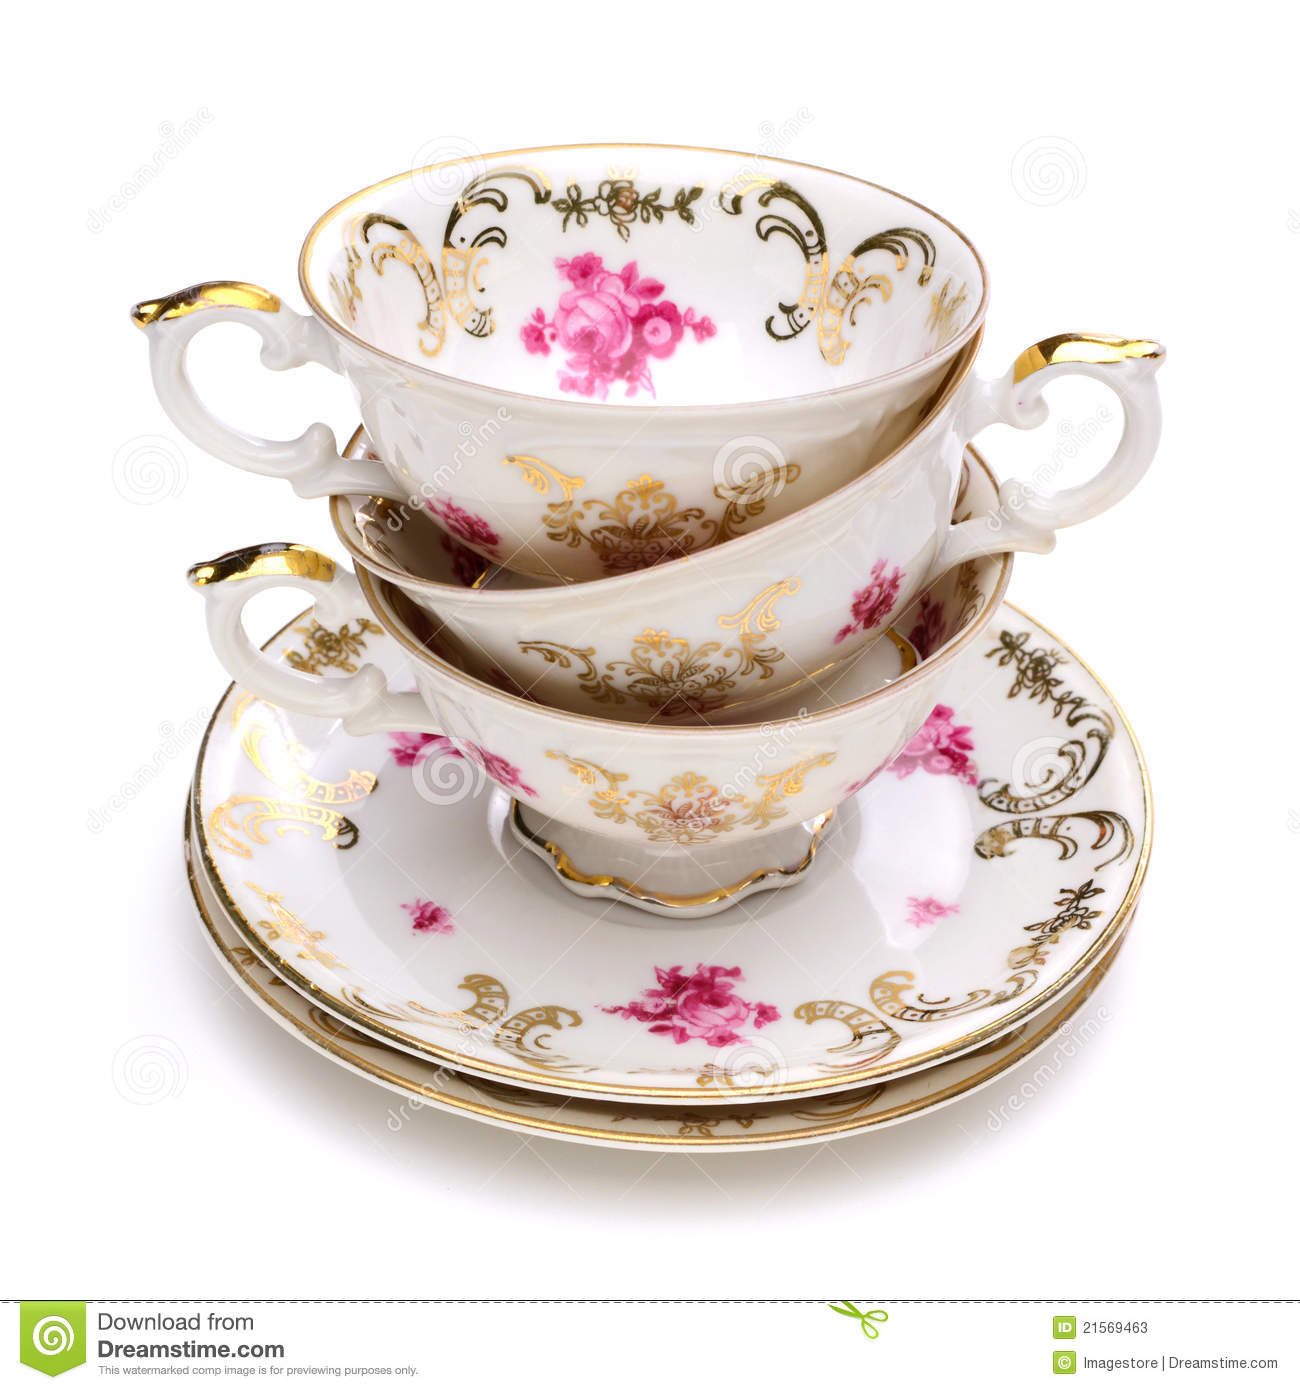 More Similar Stock Images Of   Stack Of Antique Tea Cups  